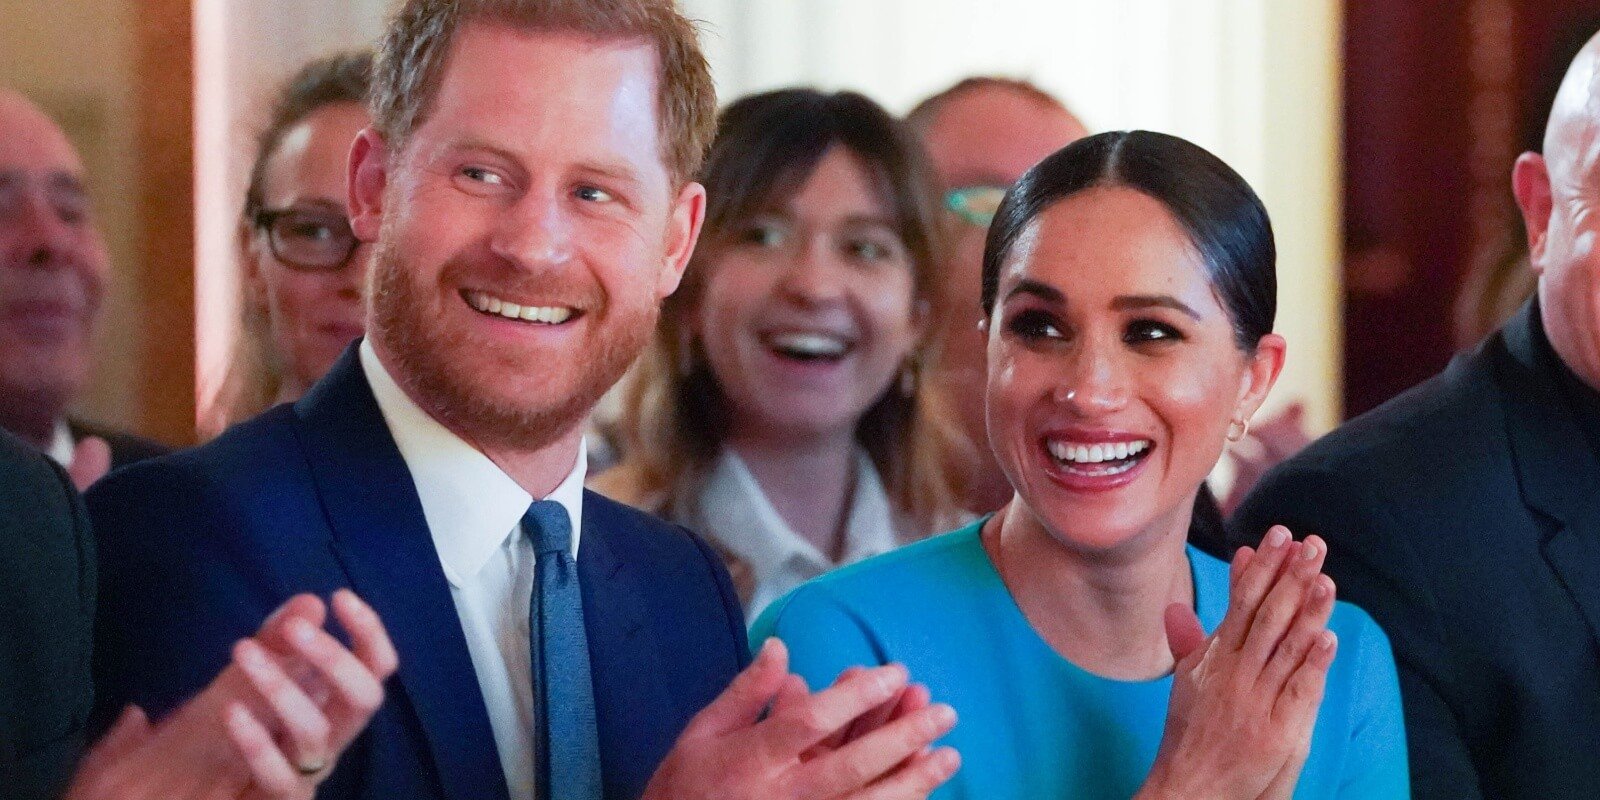 Prince Harry and Meghan Markle clapping at the annual Endeavour Fund Awards at Mansion House on March 5, 2020 in London, England.